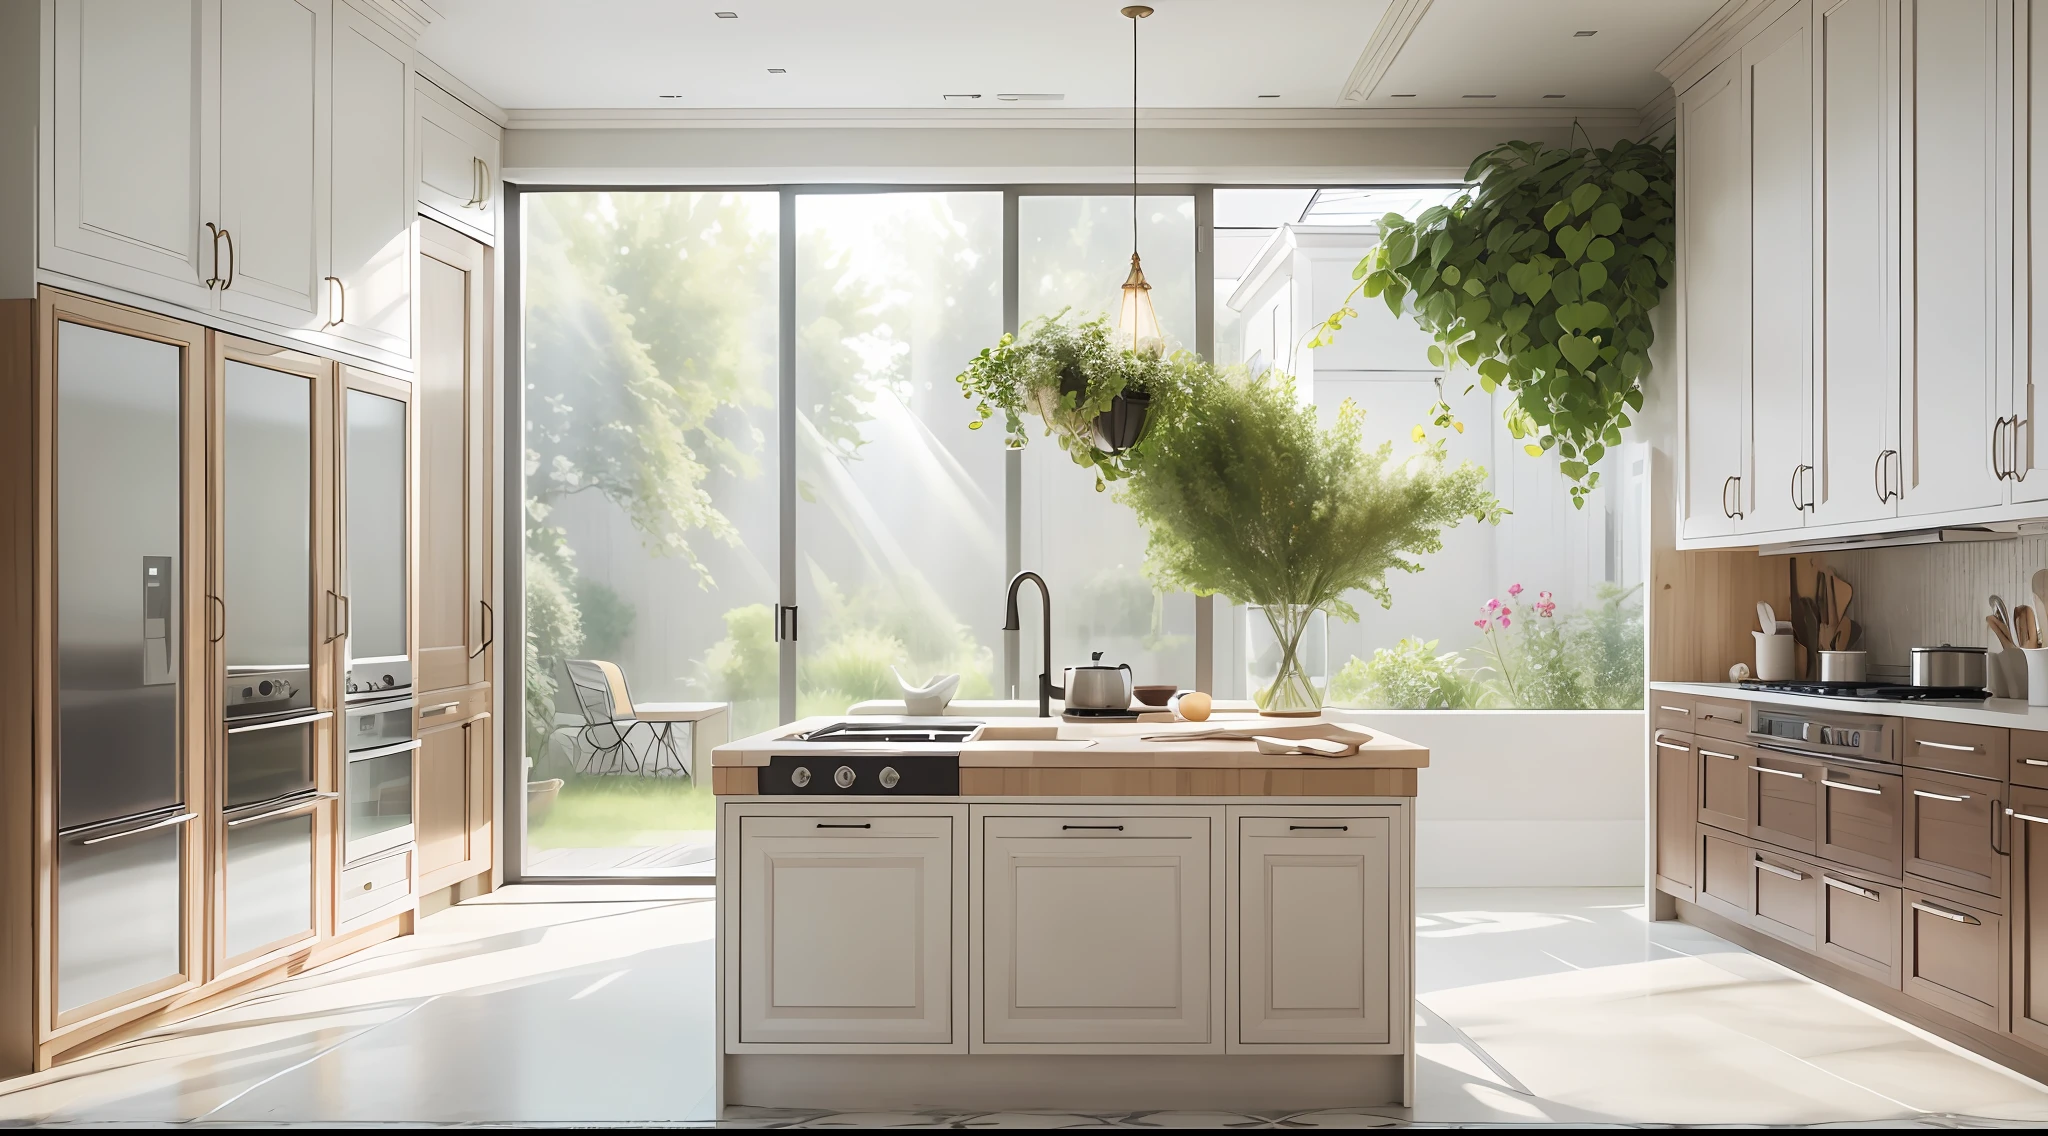 Minimalist kitchen，Few flowers and plants（1:0.02），sun's rays，an award winning masterpiece，Incredible details Large windows，highly  detailed，Harper's Bazaar art，fashion magazine，fluency，Clear focus，8K，rendering by octane